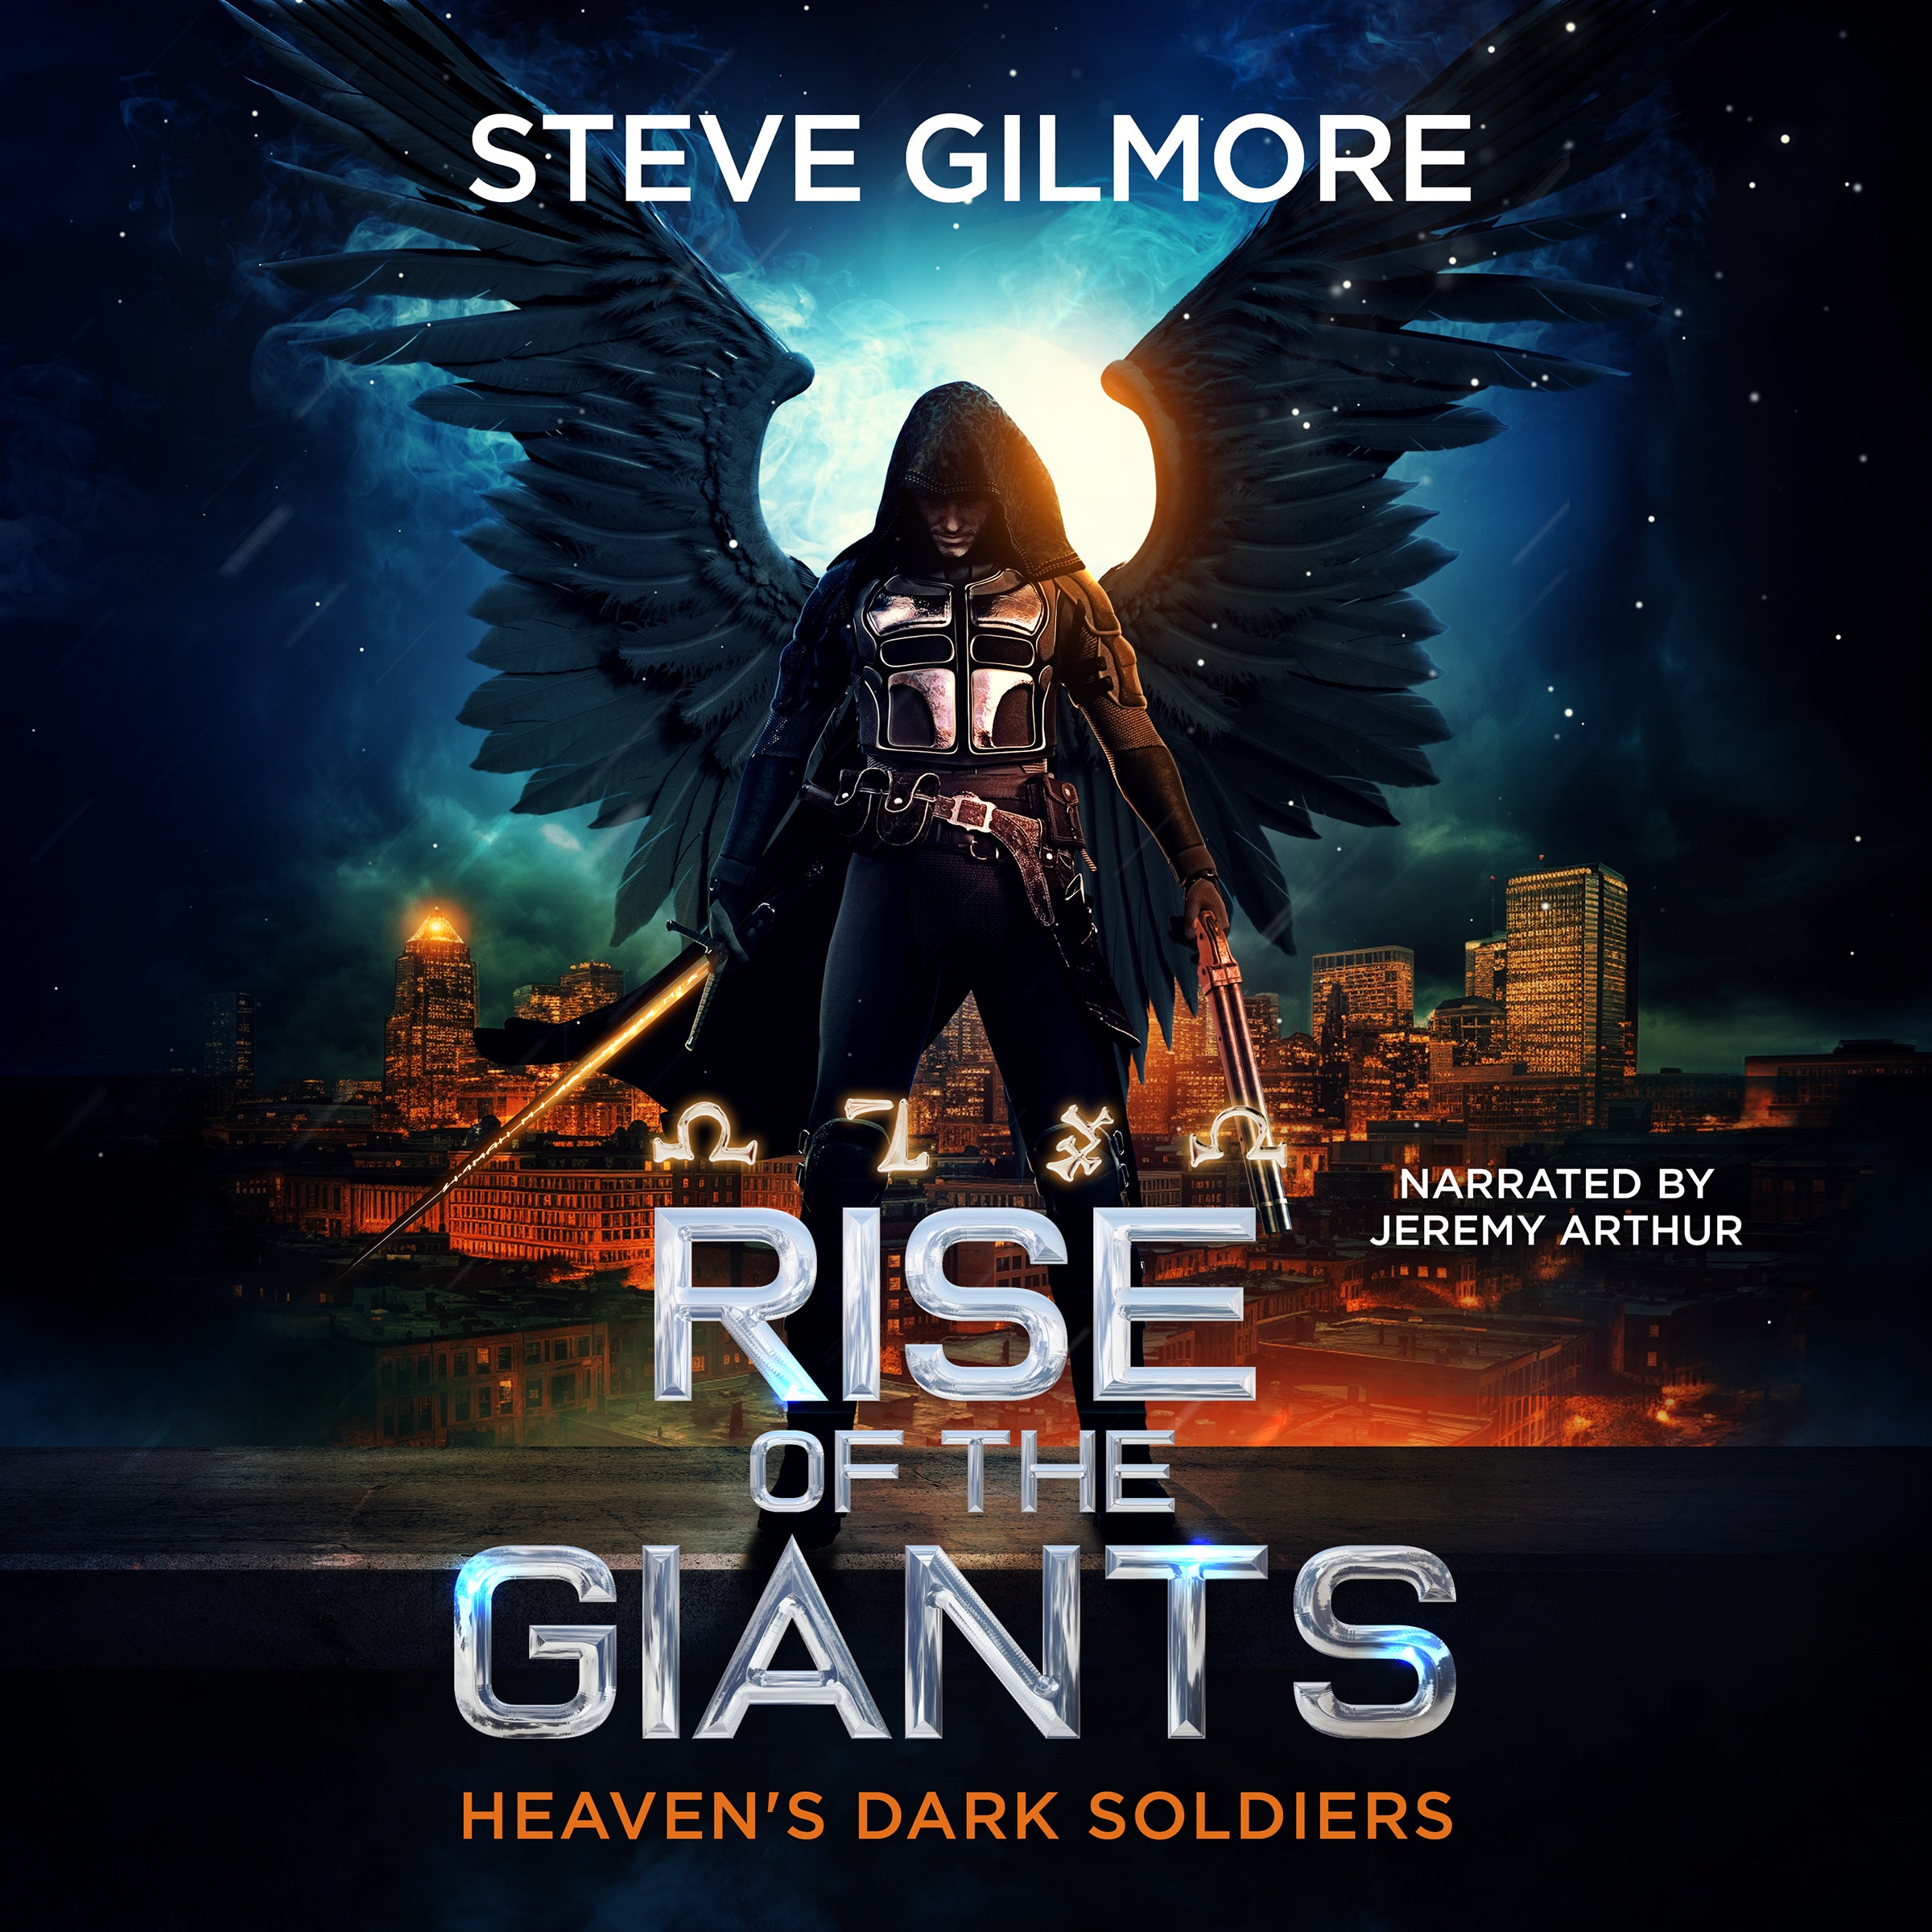 Rise of the Giants (Heaven's Dark Soldiers Book 1) Audiobook Narrated by Jeremy Arthur